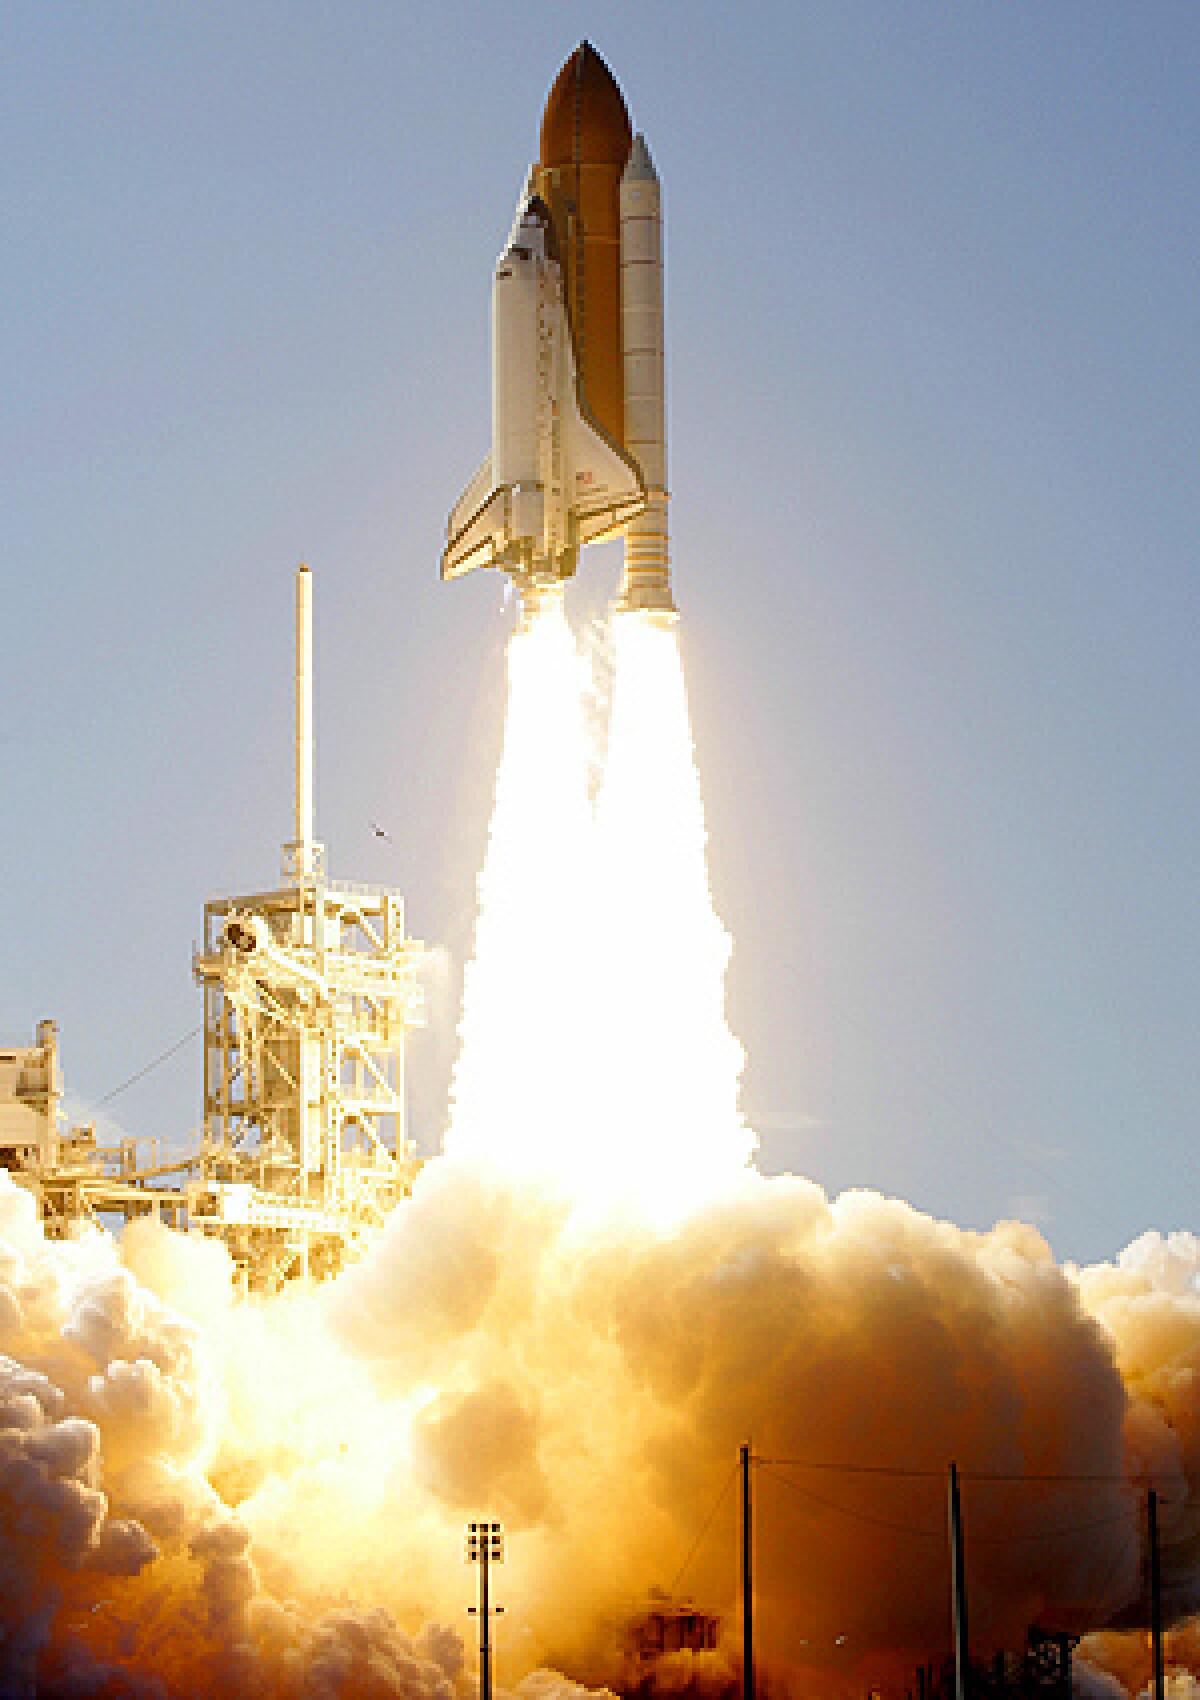 Space Shuttle Discovery lifts off from pad 39A at the Kennedy Space Center in Cape Canaveral, Fla.